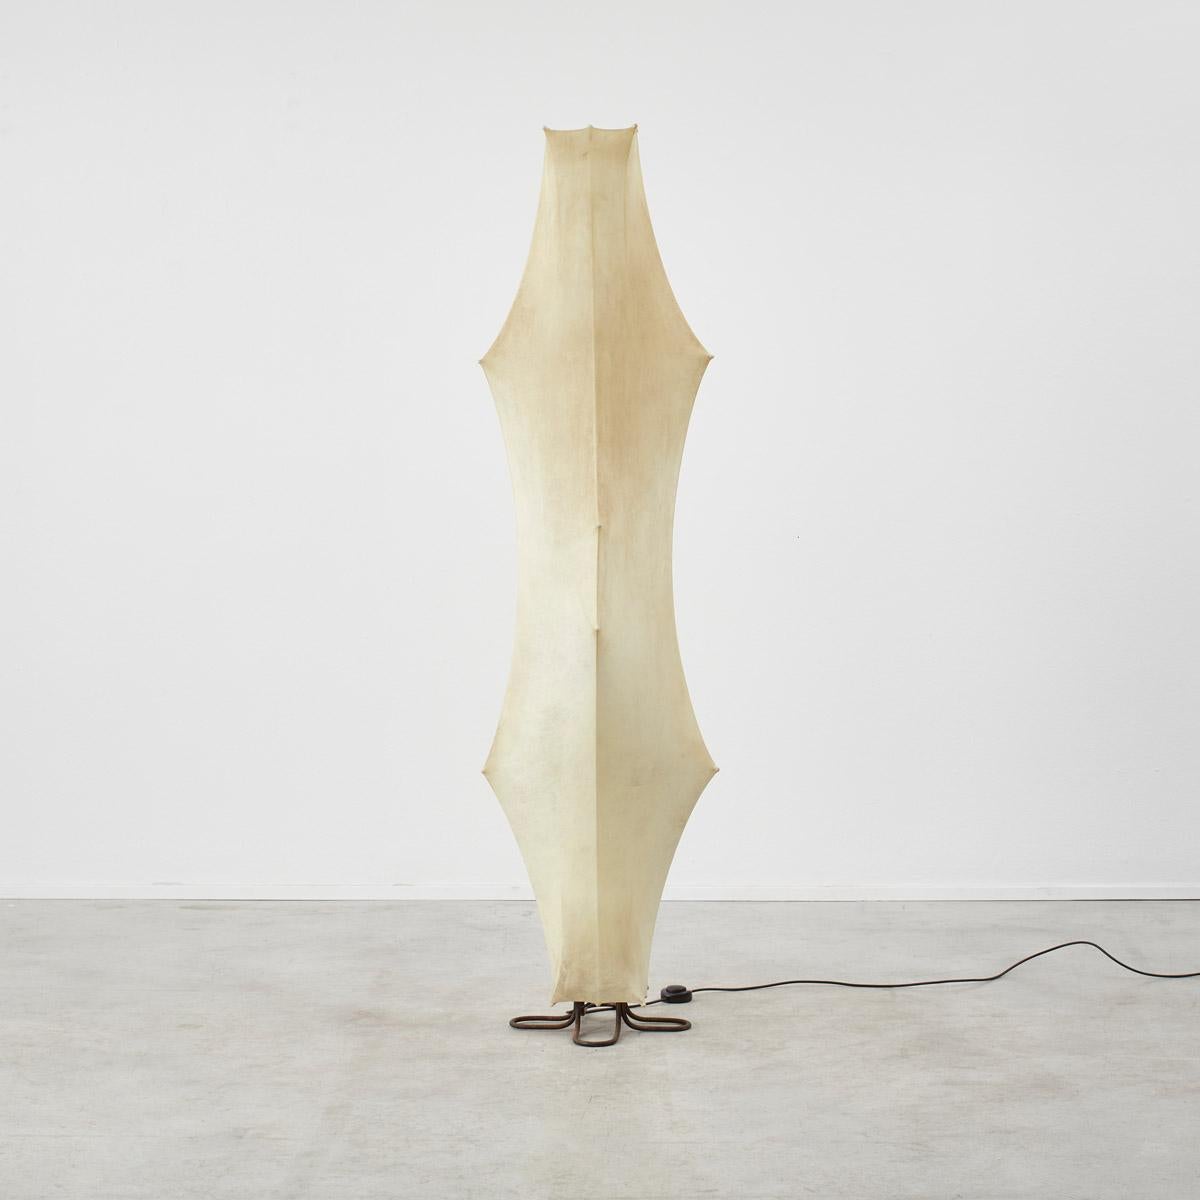 Fantasma, translates to ghost in Italian, reflecting the almost evanescent presence of the lamp. Created using cocoon resin on a metal internal structure, the shade emits a warm glow. The Fantasma Piccolo floor lamp is the first design of Tobia